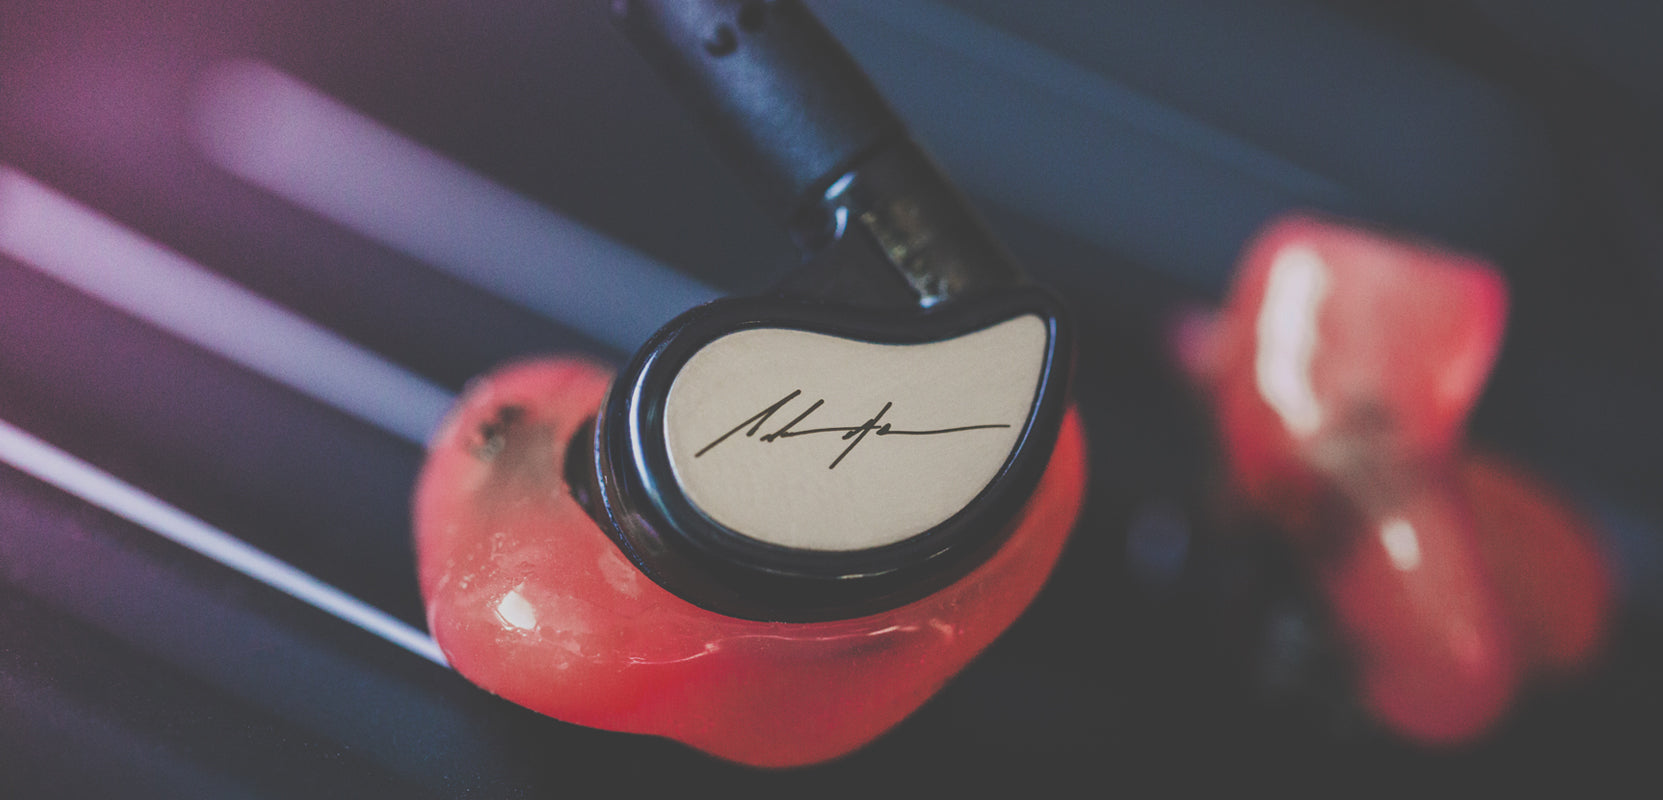 Close-up image of a pair of custom red in-ear monitors with a signature design on the faceplate, placed on a dark background with soft lighting.